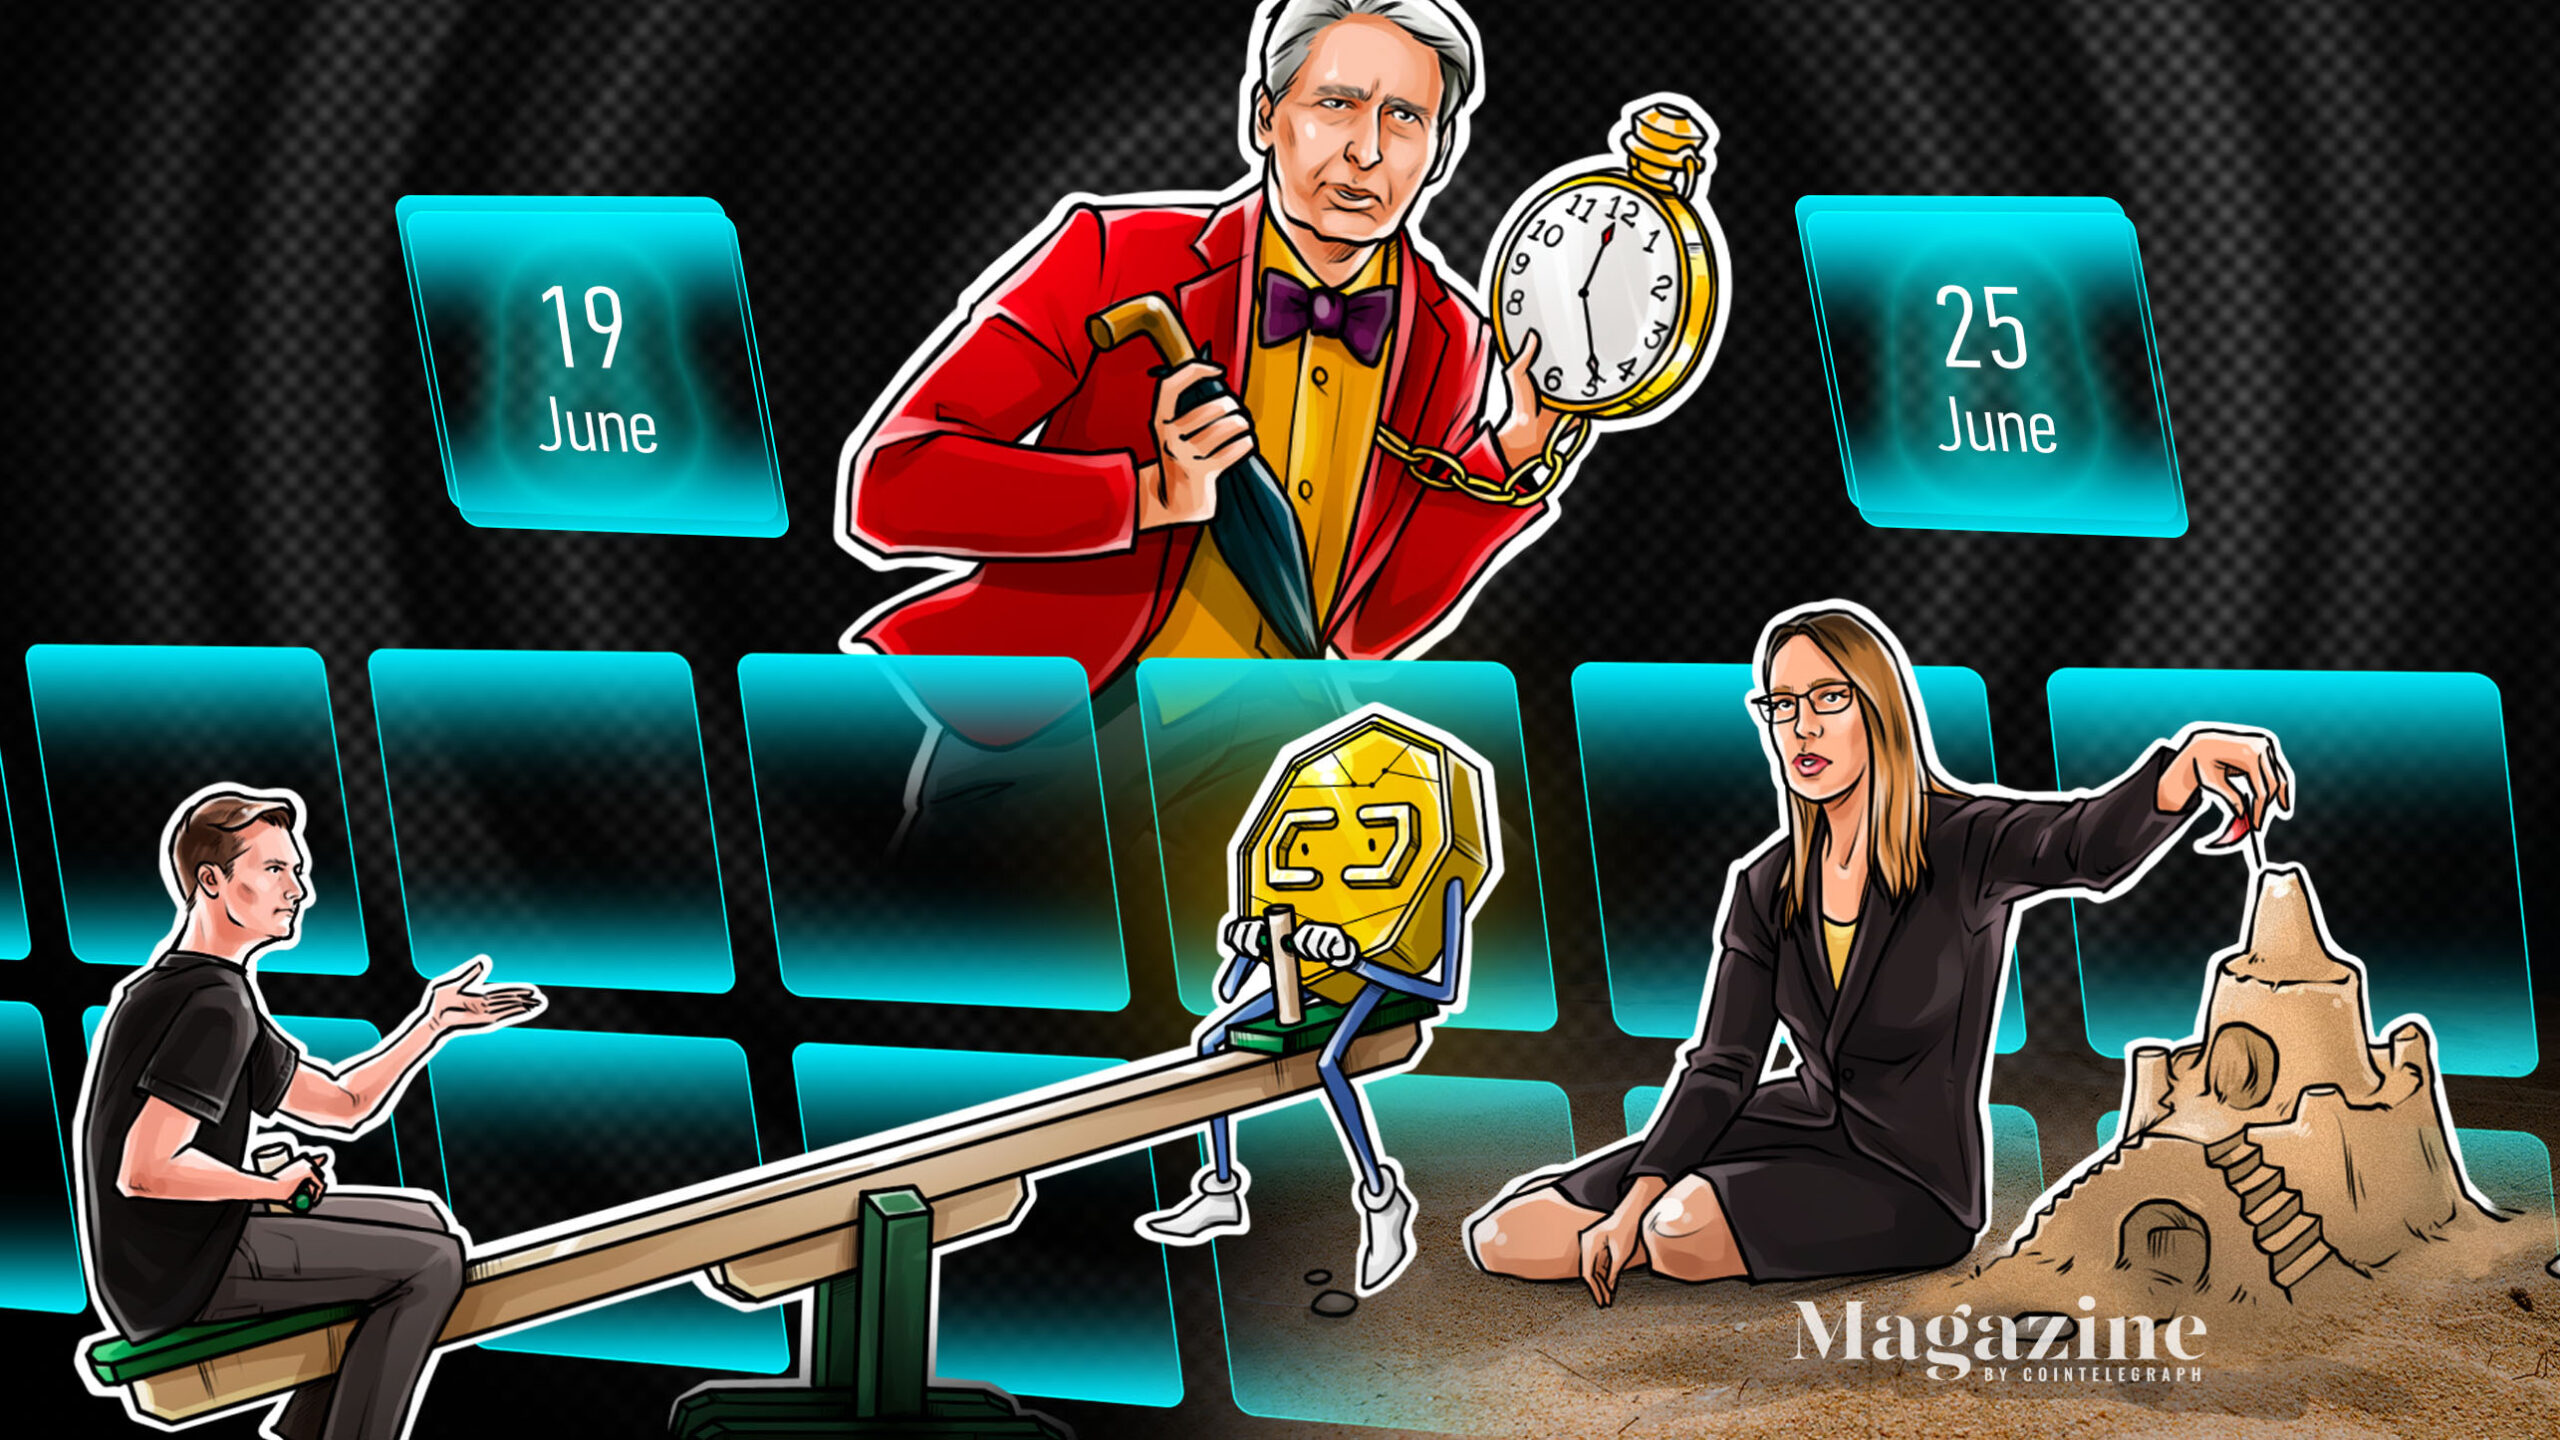 Jed-mccaleb’s-xrp-bag-is-almost-gone,-ethereum’s-difficulty-bomb-delayed-and-ftx-inks-deal-with-blockfi:-hodler’s-digest,-june-26-july-2